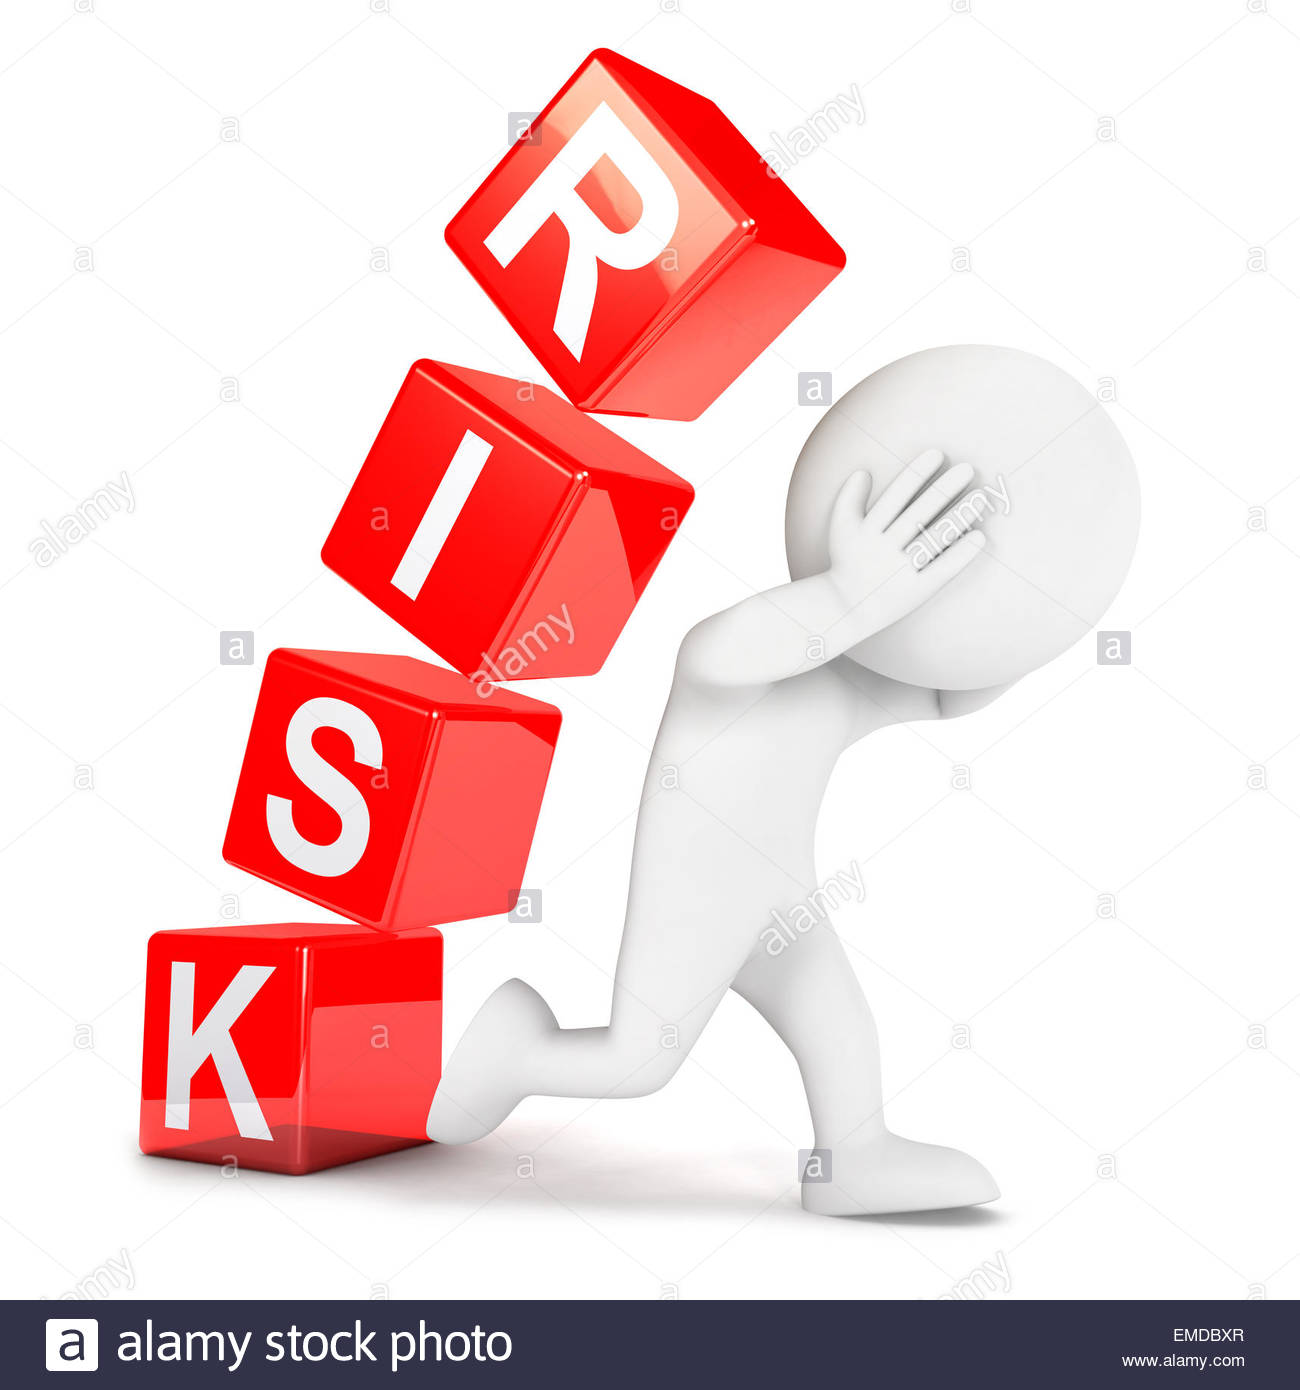 3d White People Risk Isolated Background Image Stock